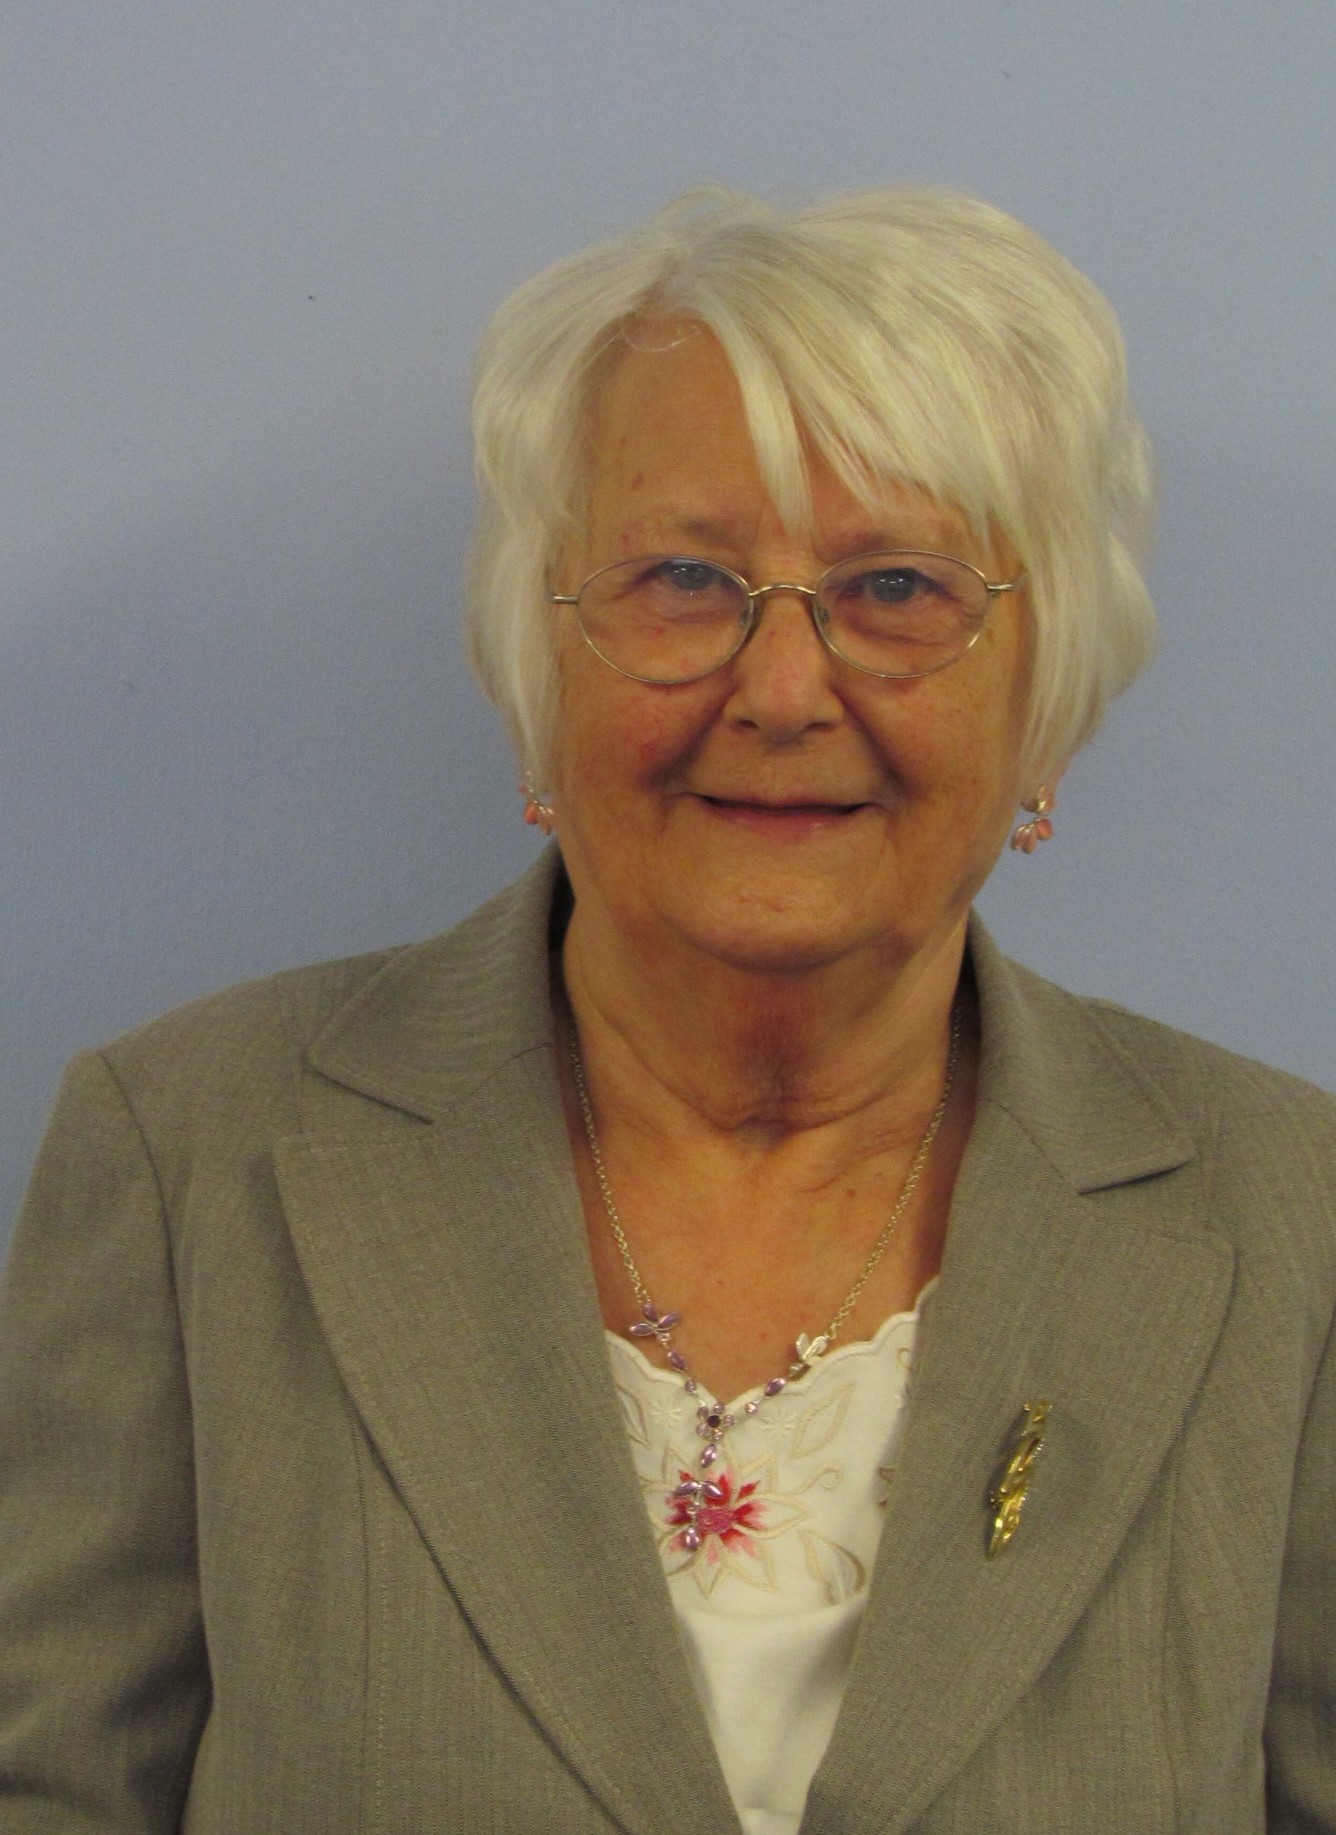 West Whitlawburn Housing Co-operative mourns the loss of Muriel Alcorn